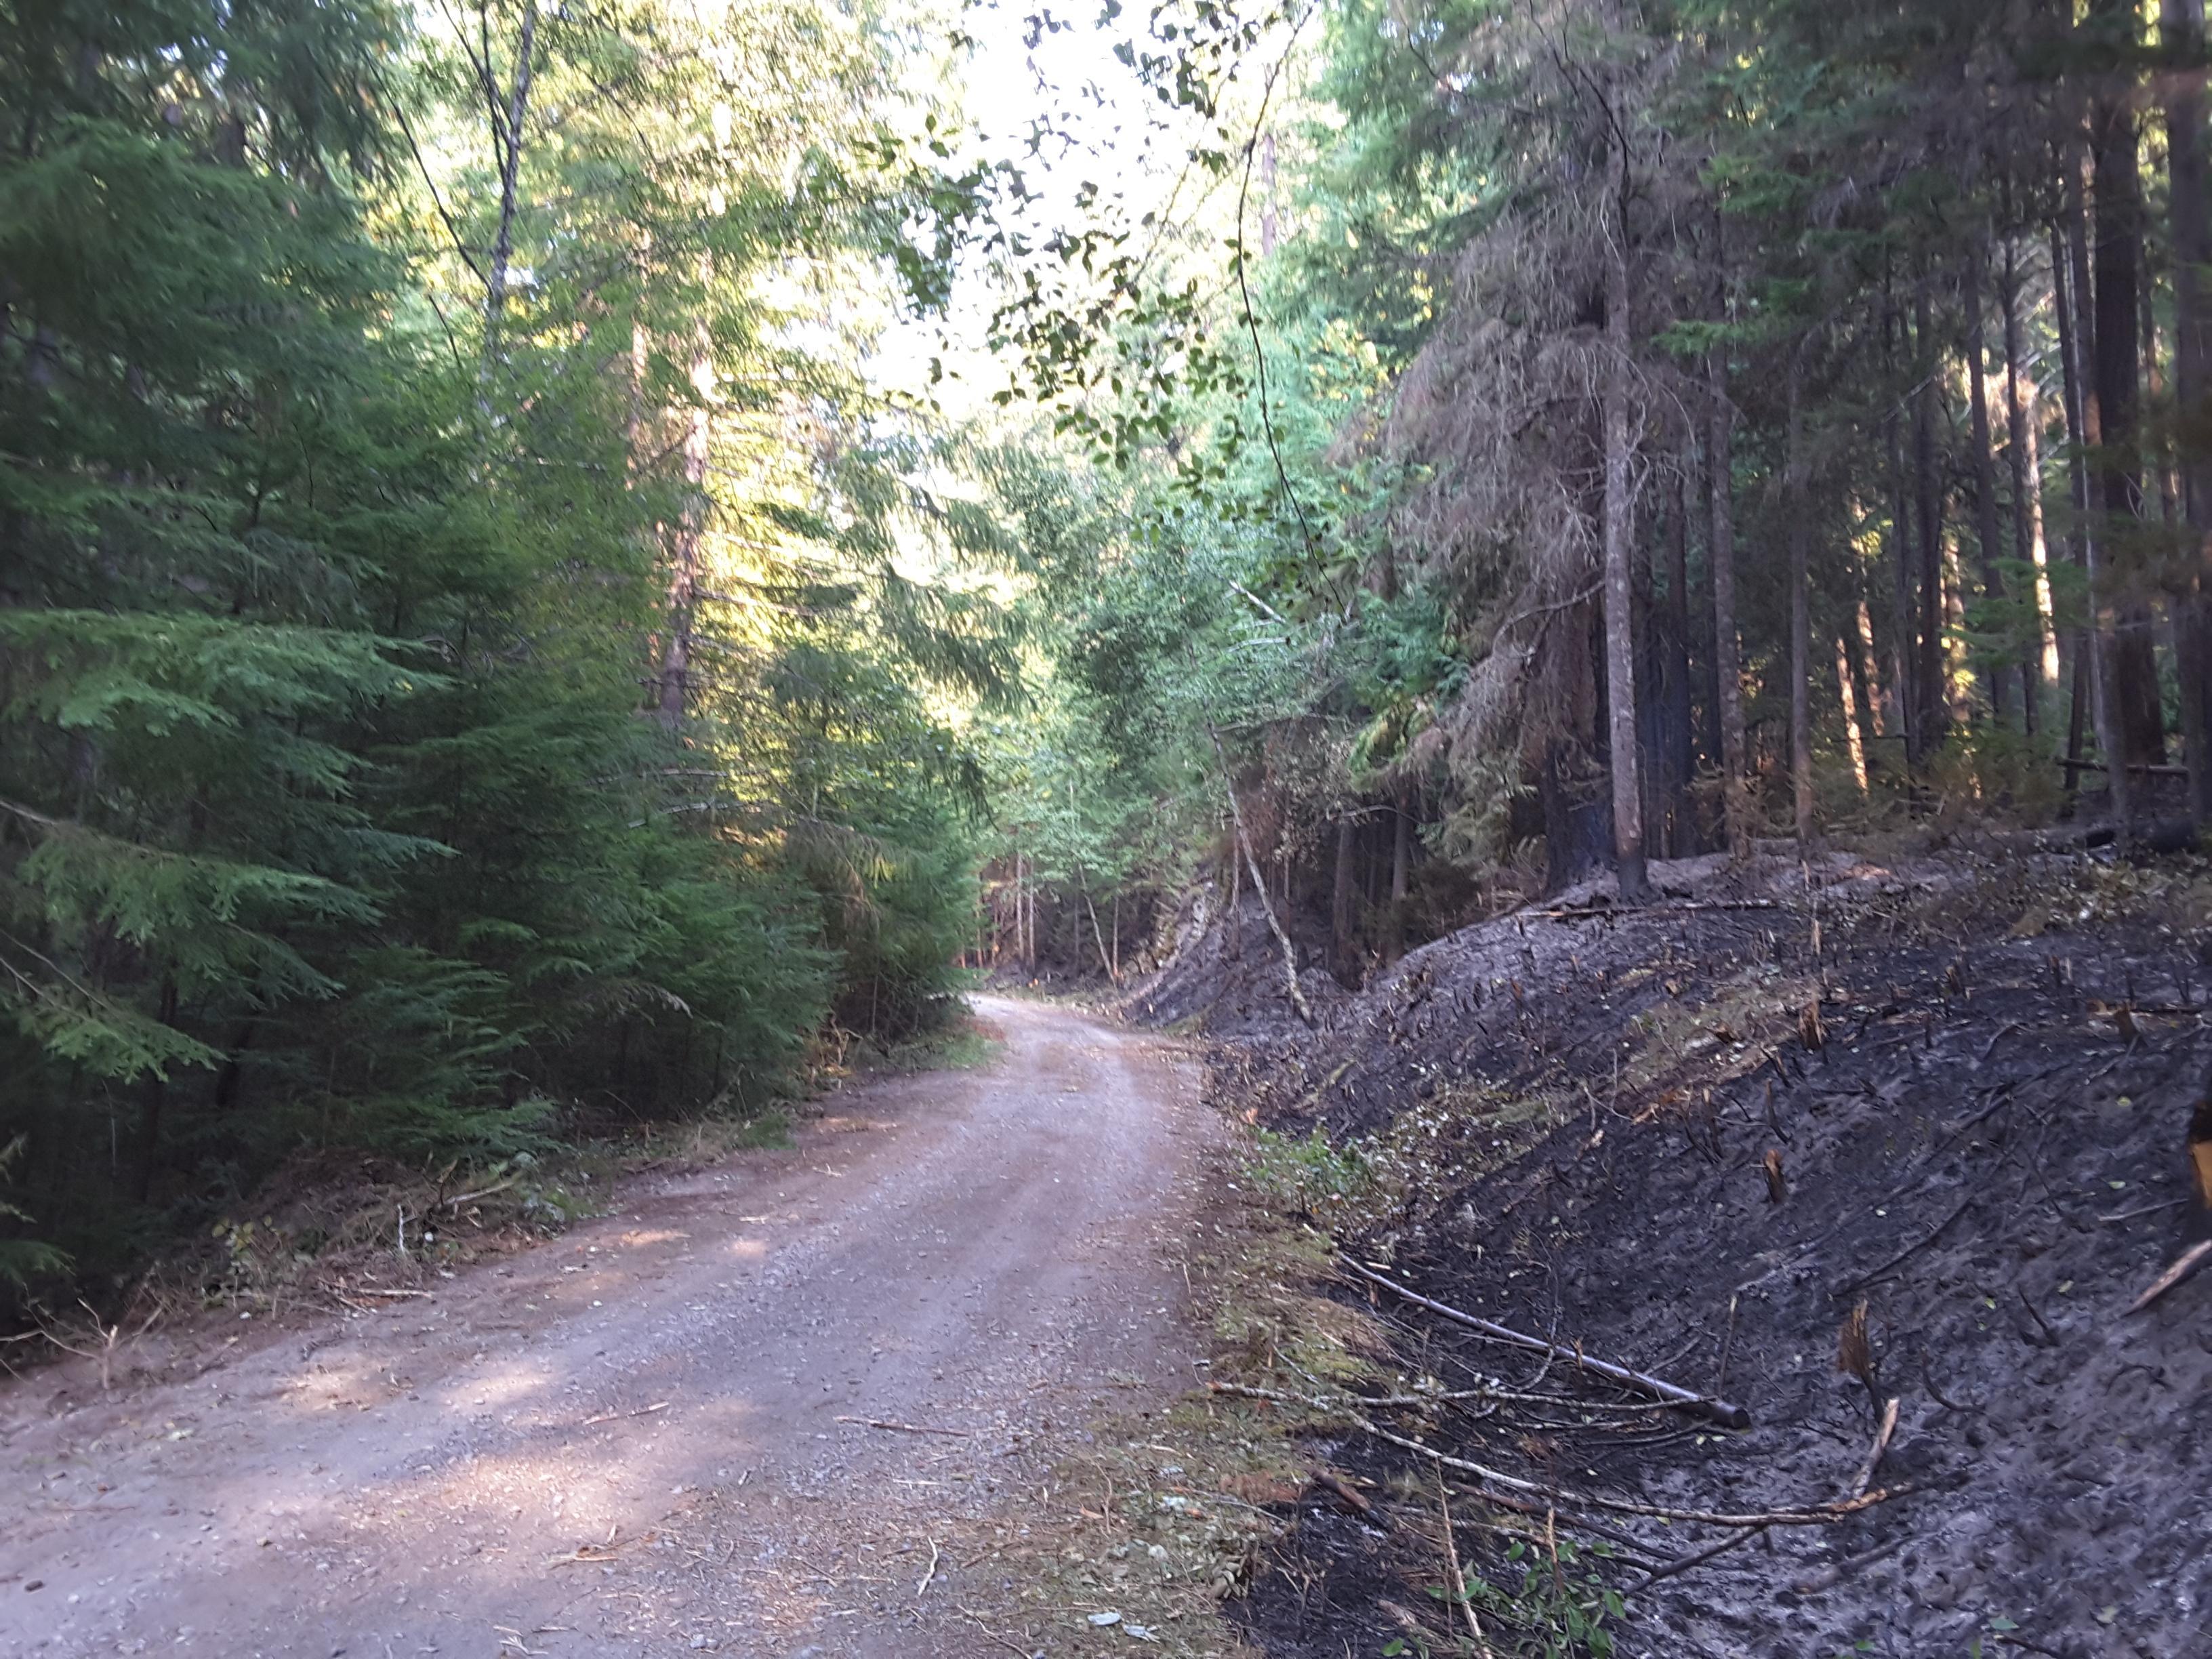 The right side of Forest Road 4612 had the vegetation cut back before it burned. The left side of the road has thick unburned vegetation, showing how the right side was before prep work and fire.